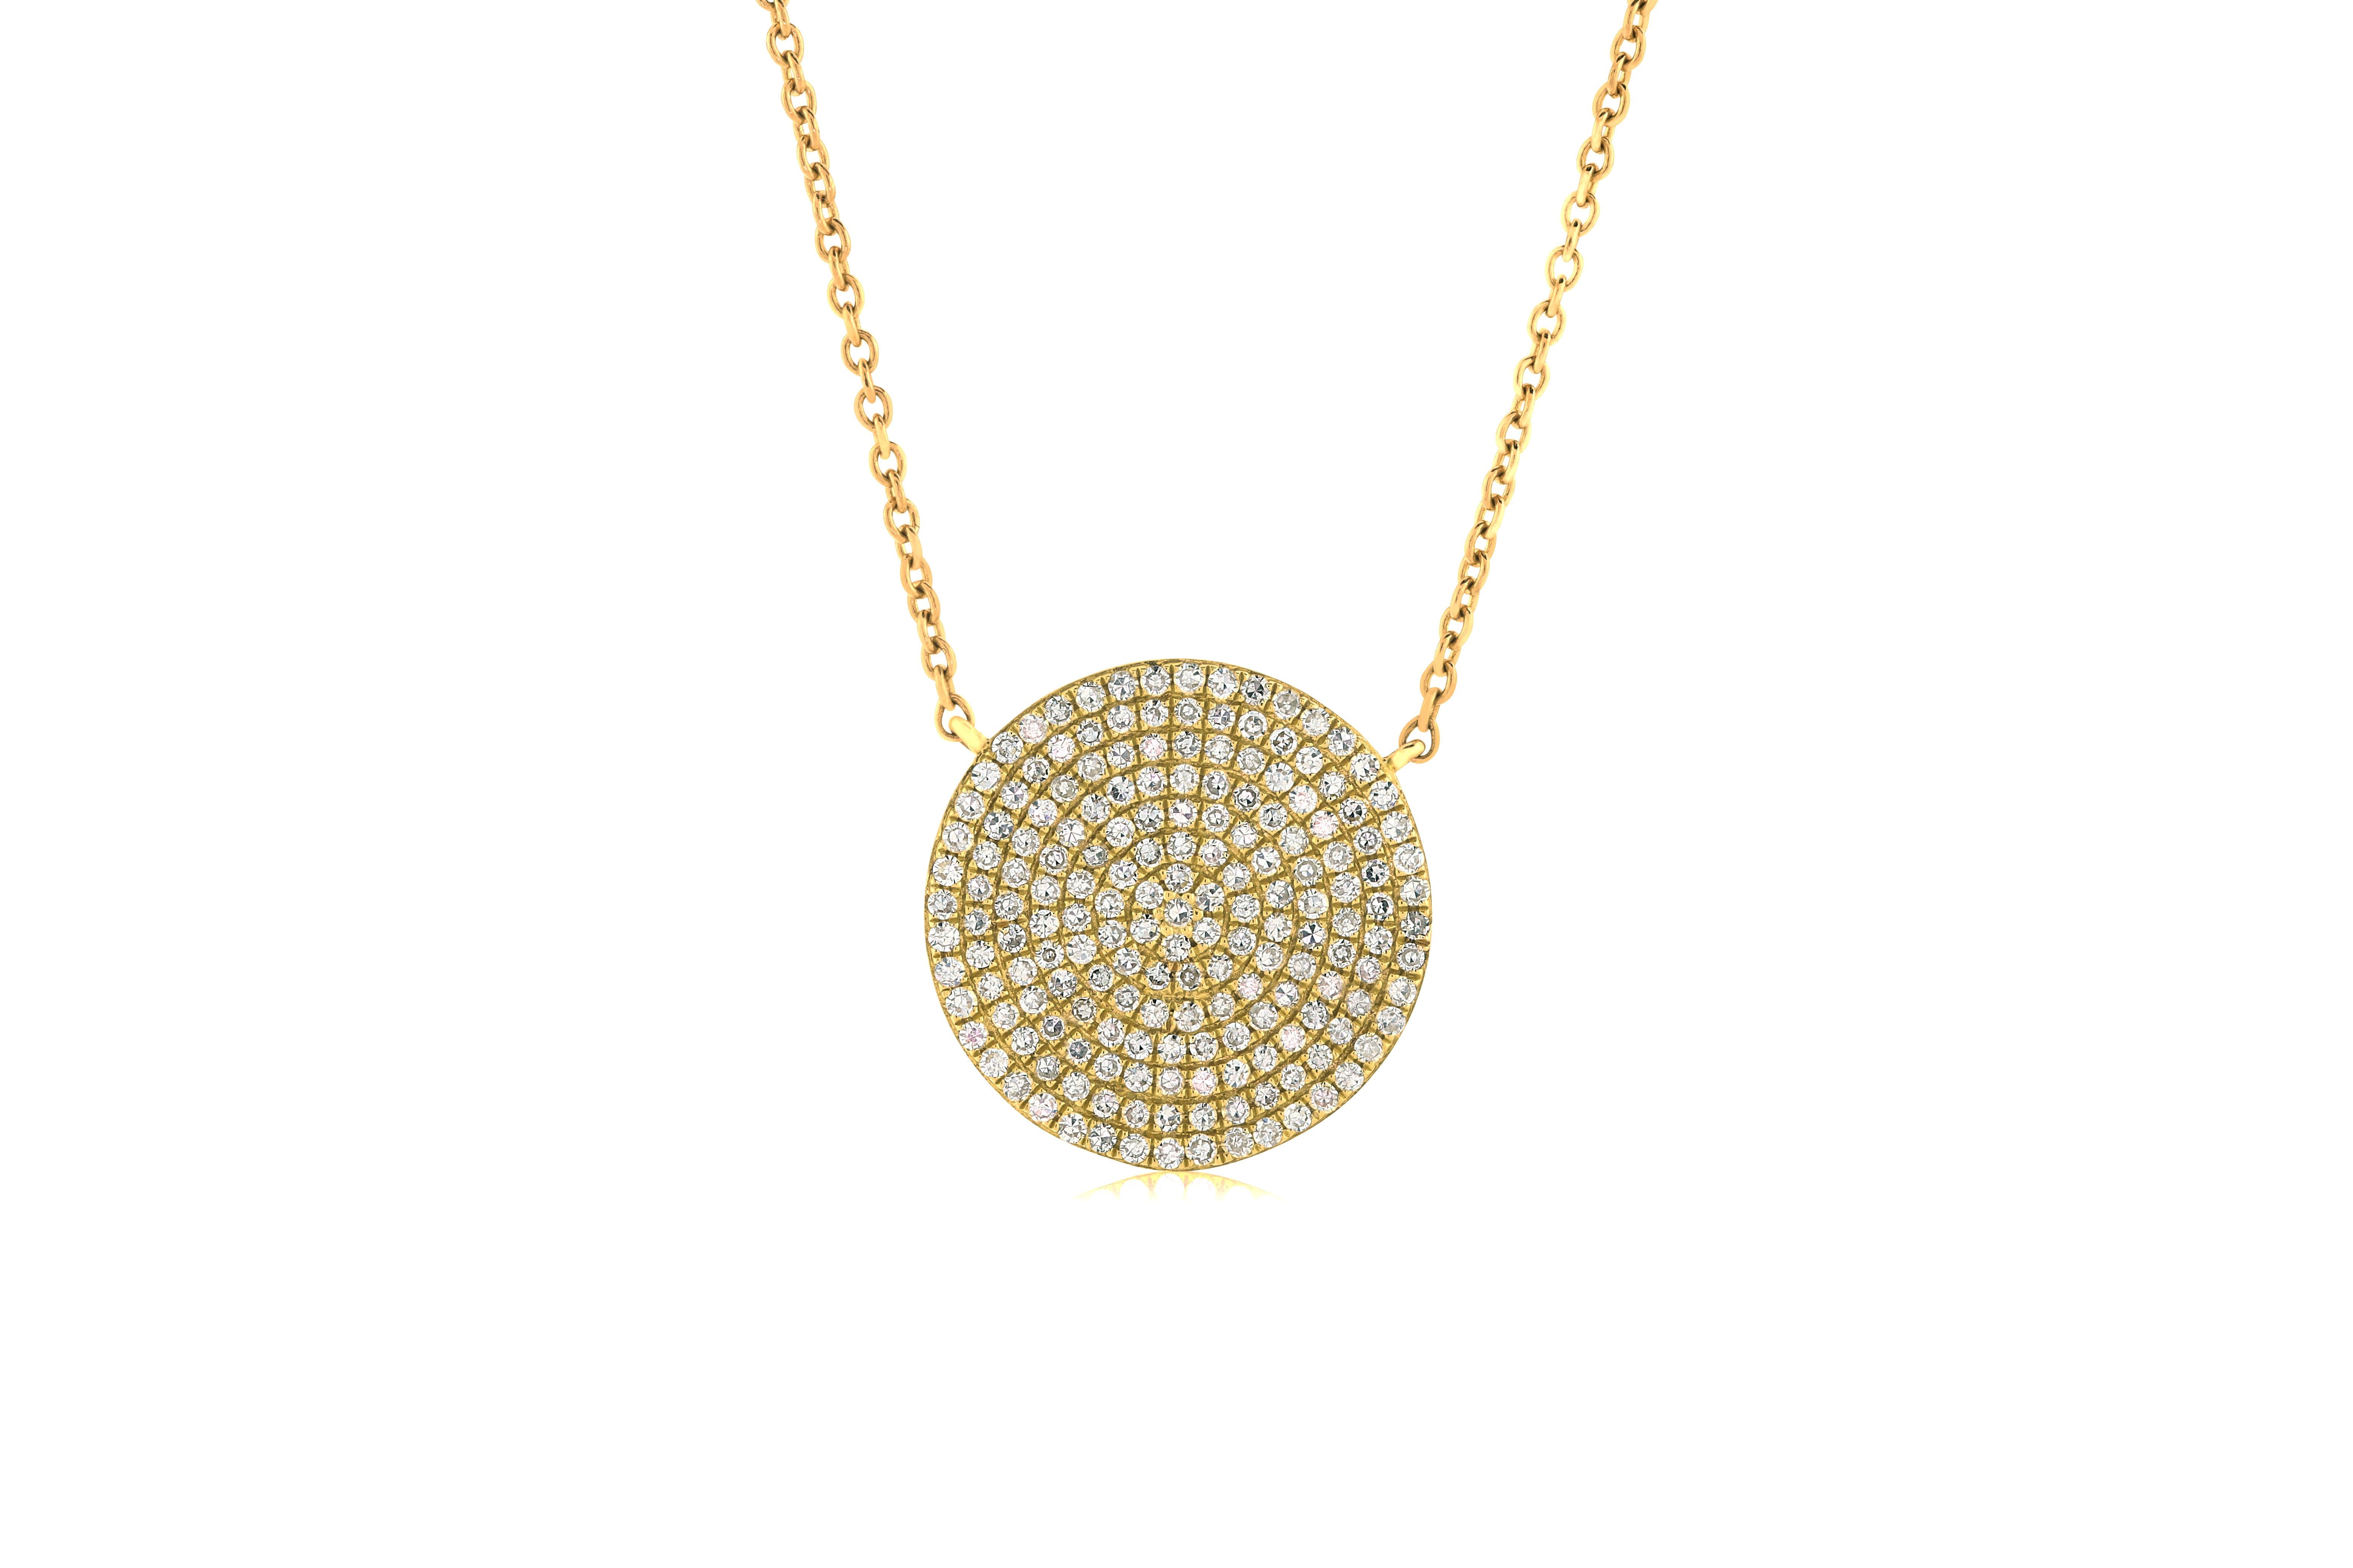 This pave diamond pendant necklace features 0.57 carats of diamonds set in 14K yellow gold. Adjustable length closure. 